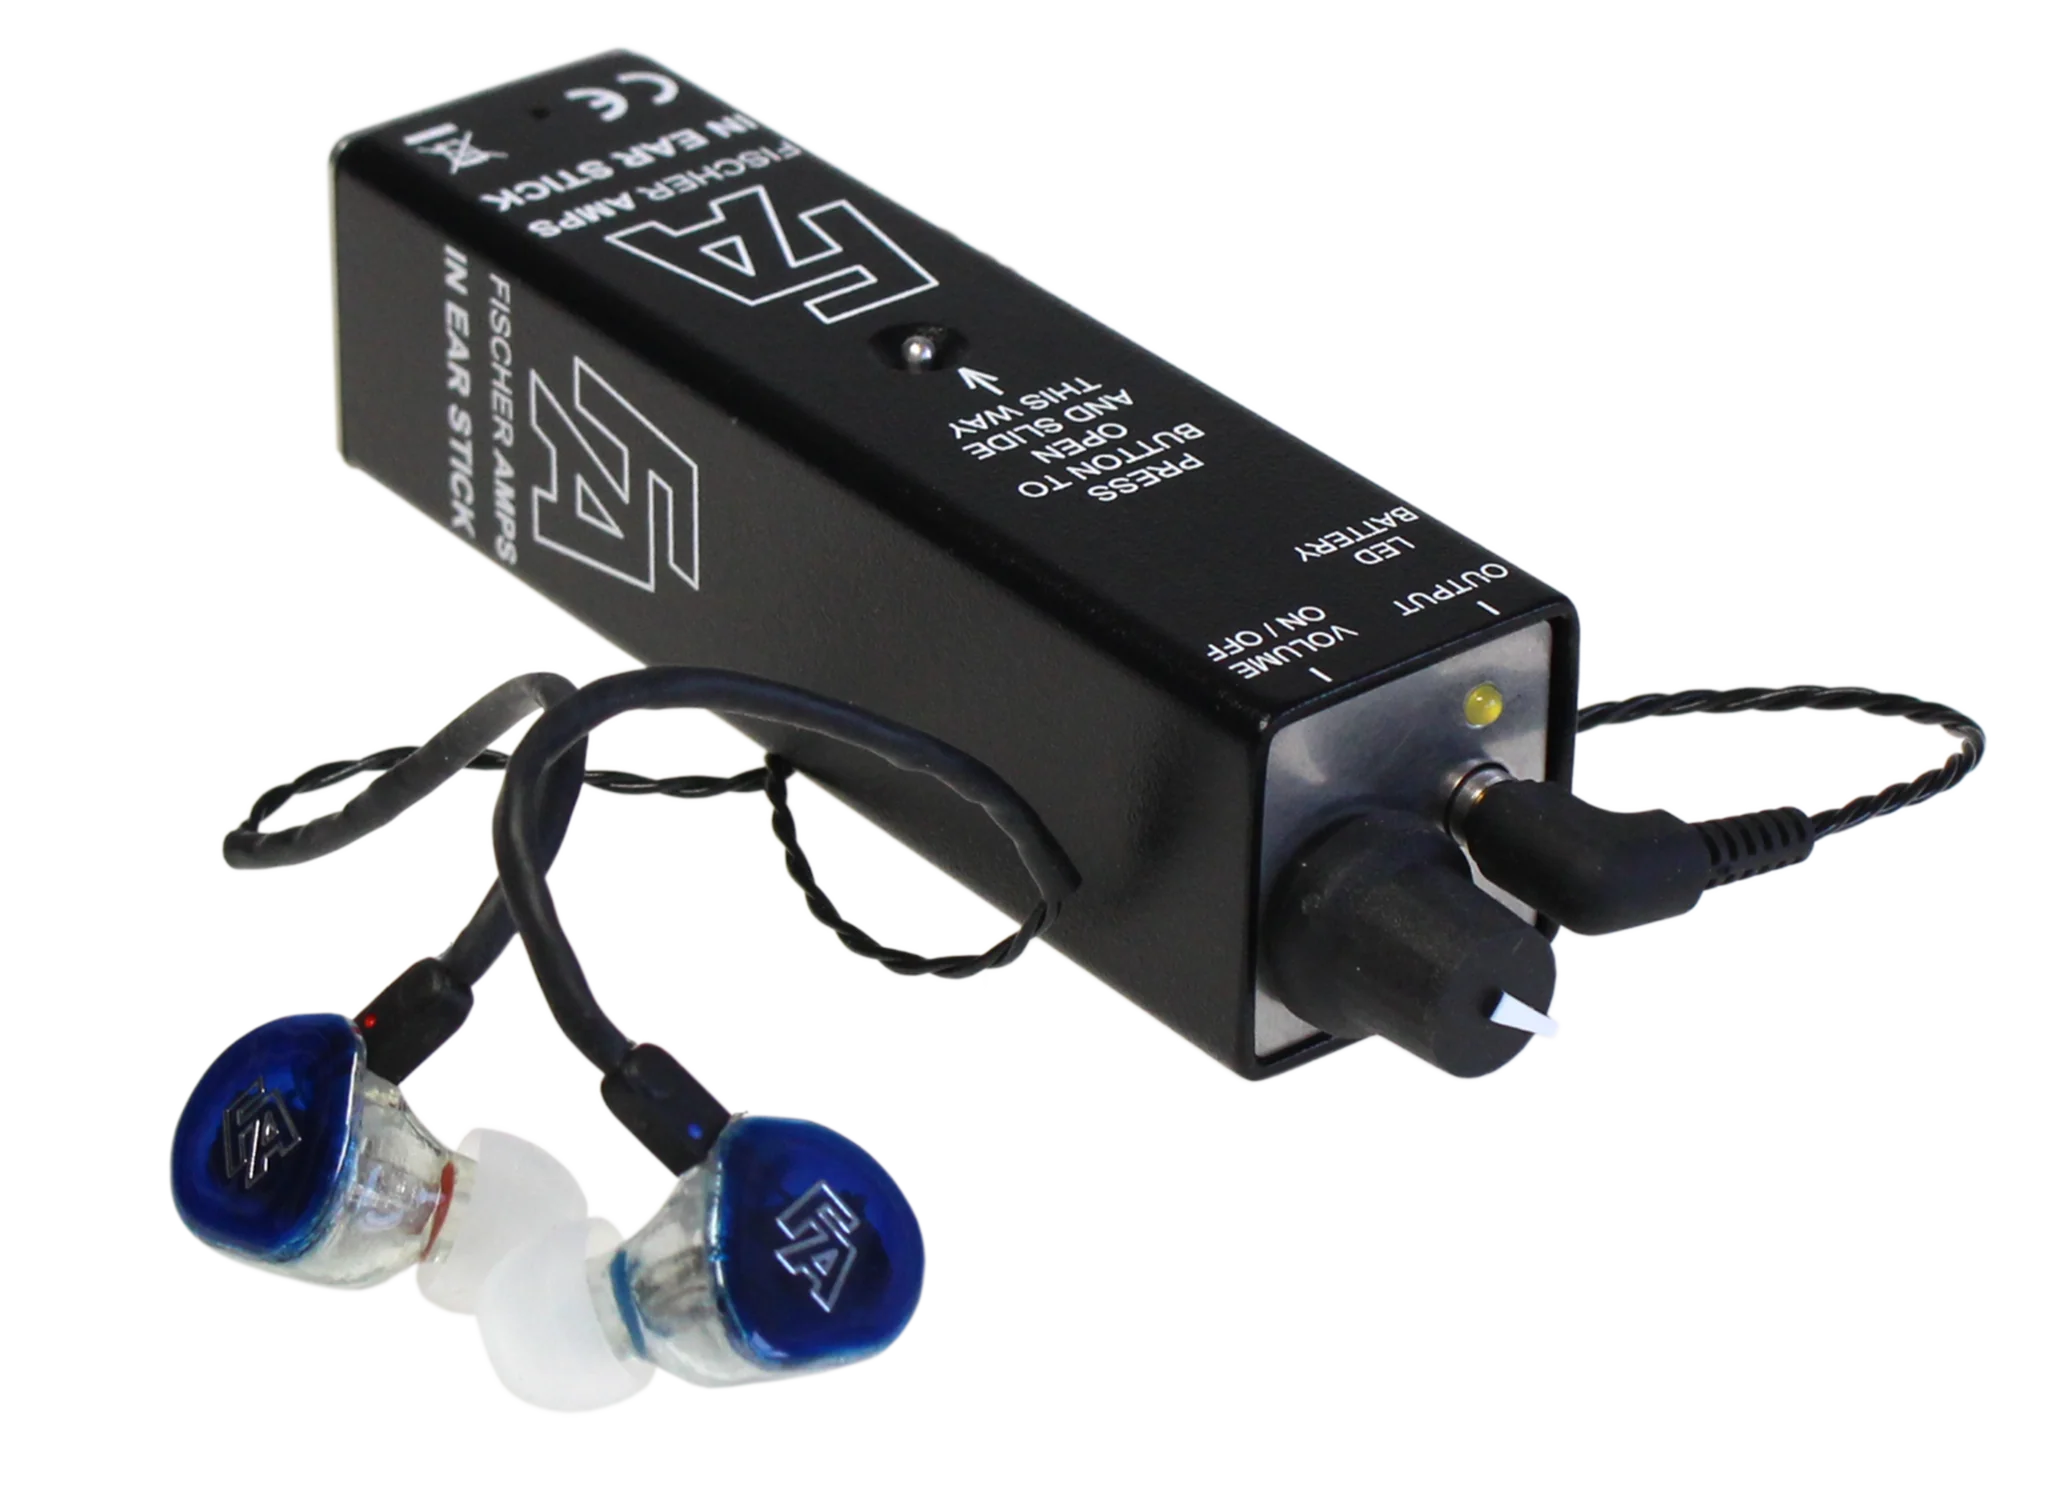 Fischer Amps "The Stick" In-Ear Headphone Amp